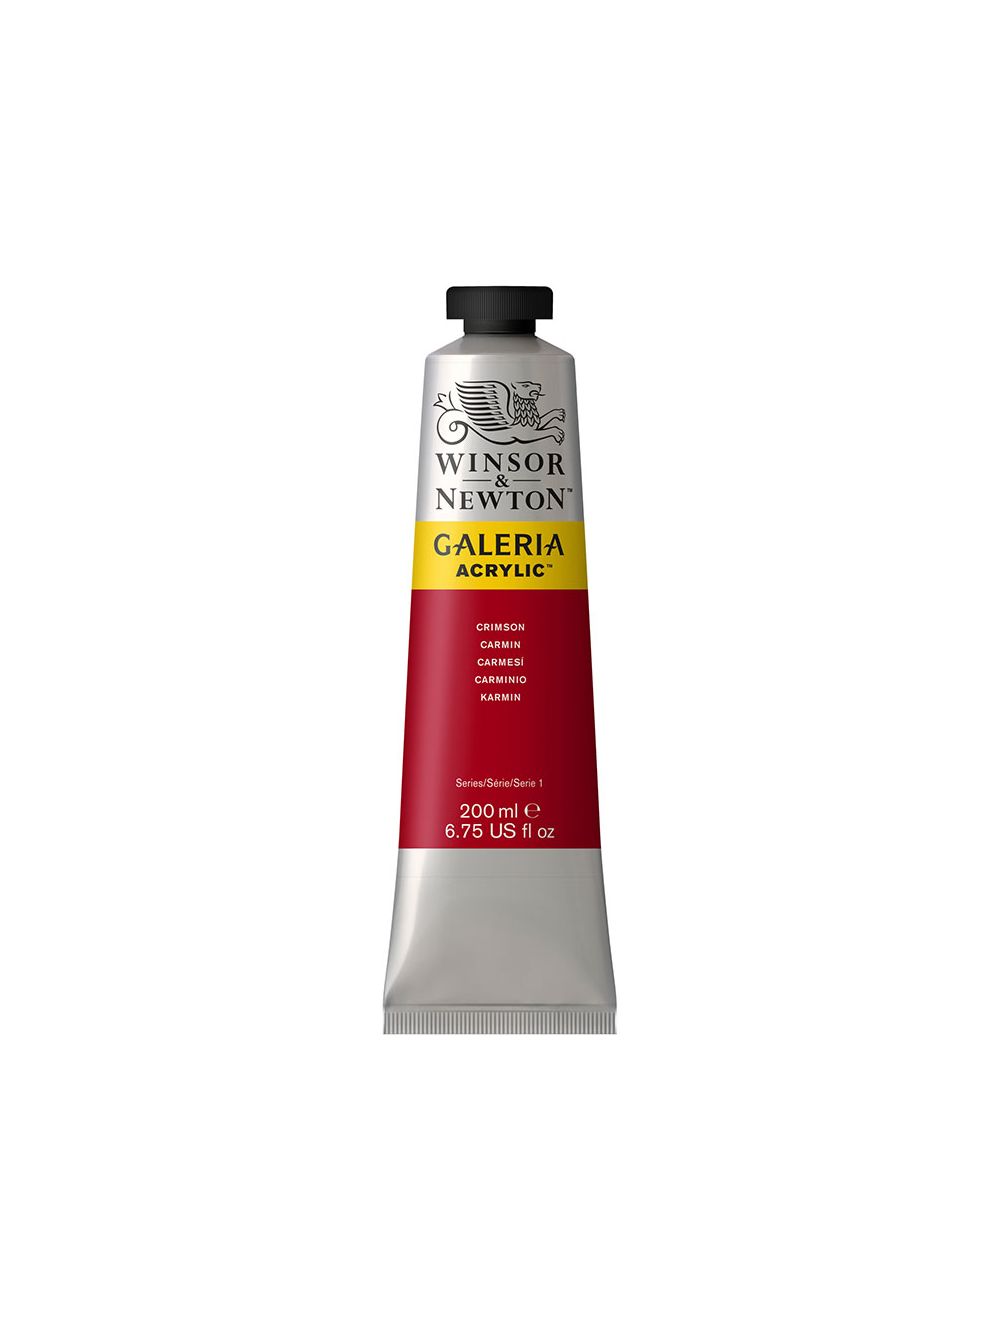 What are the primary colours in Winsor & Newton acrylics ranges?